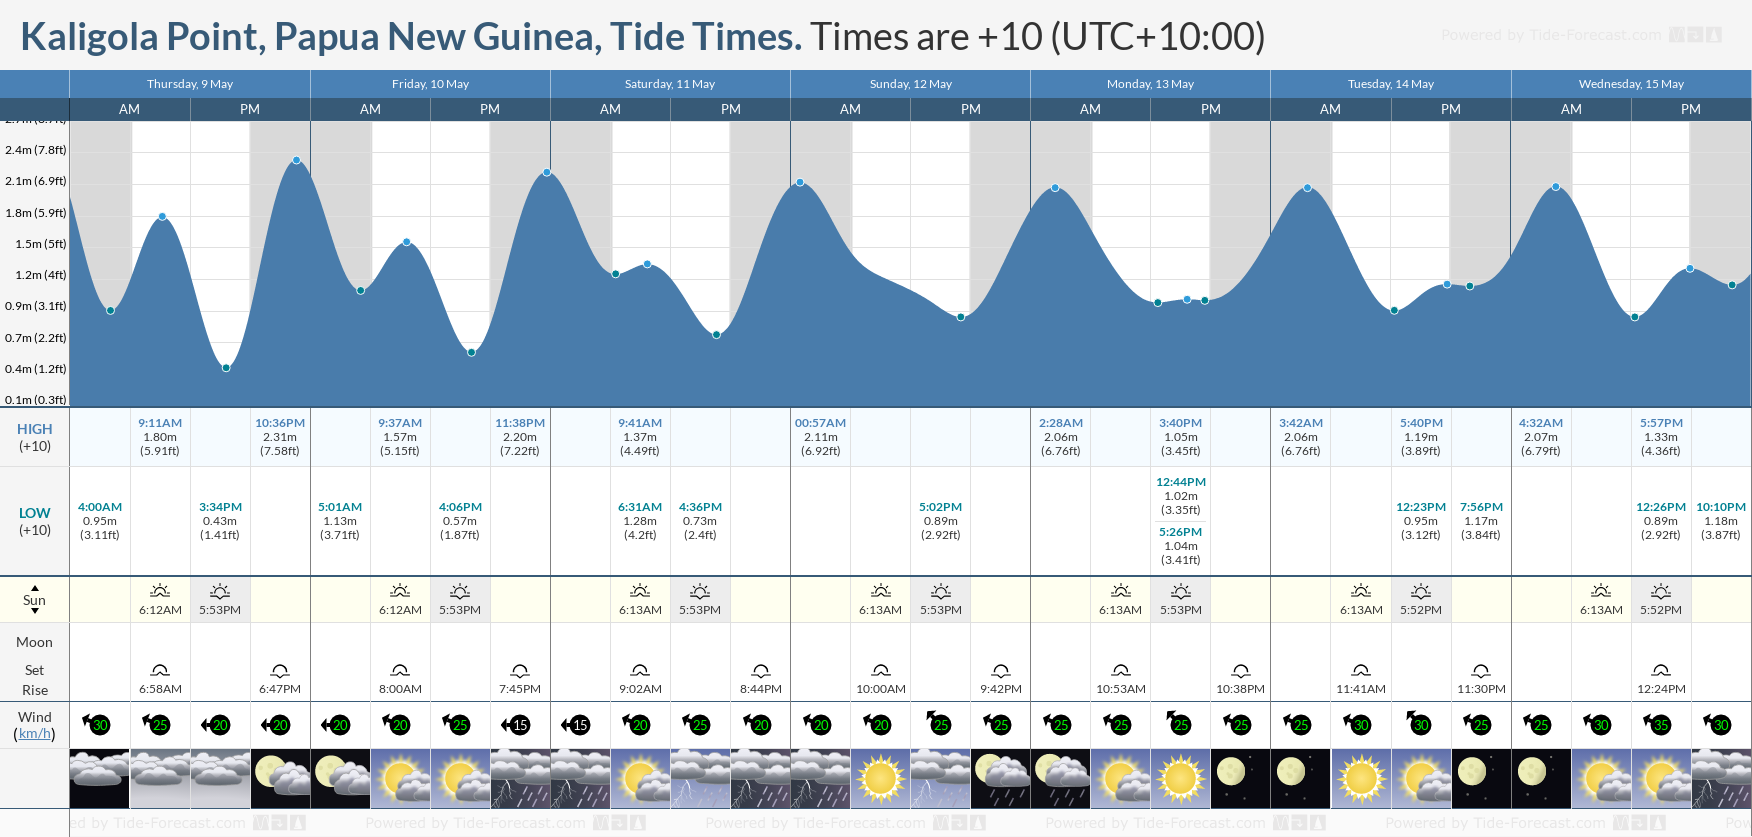 Kaligola Point, Papua New Guinea Tide Chart including high and low tide tide times for the next 7 days